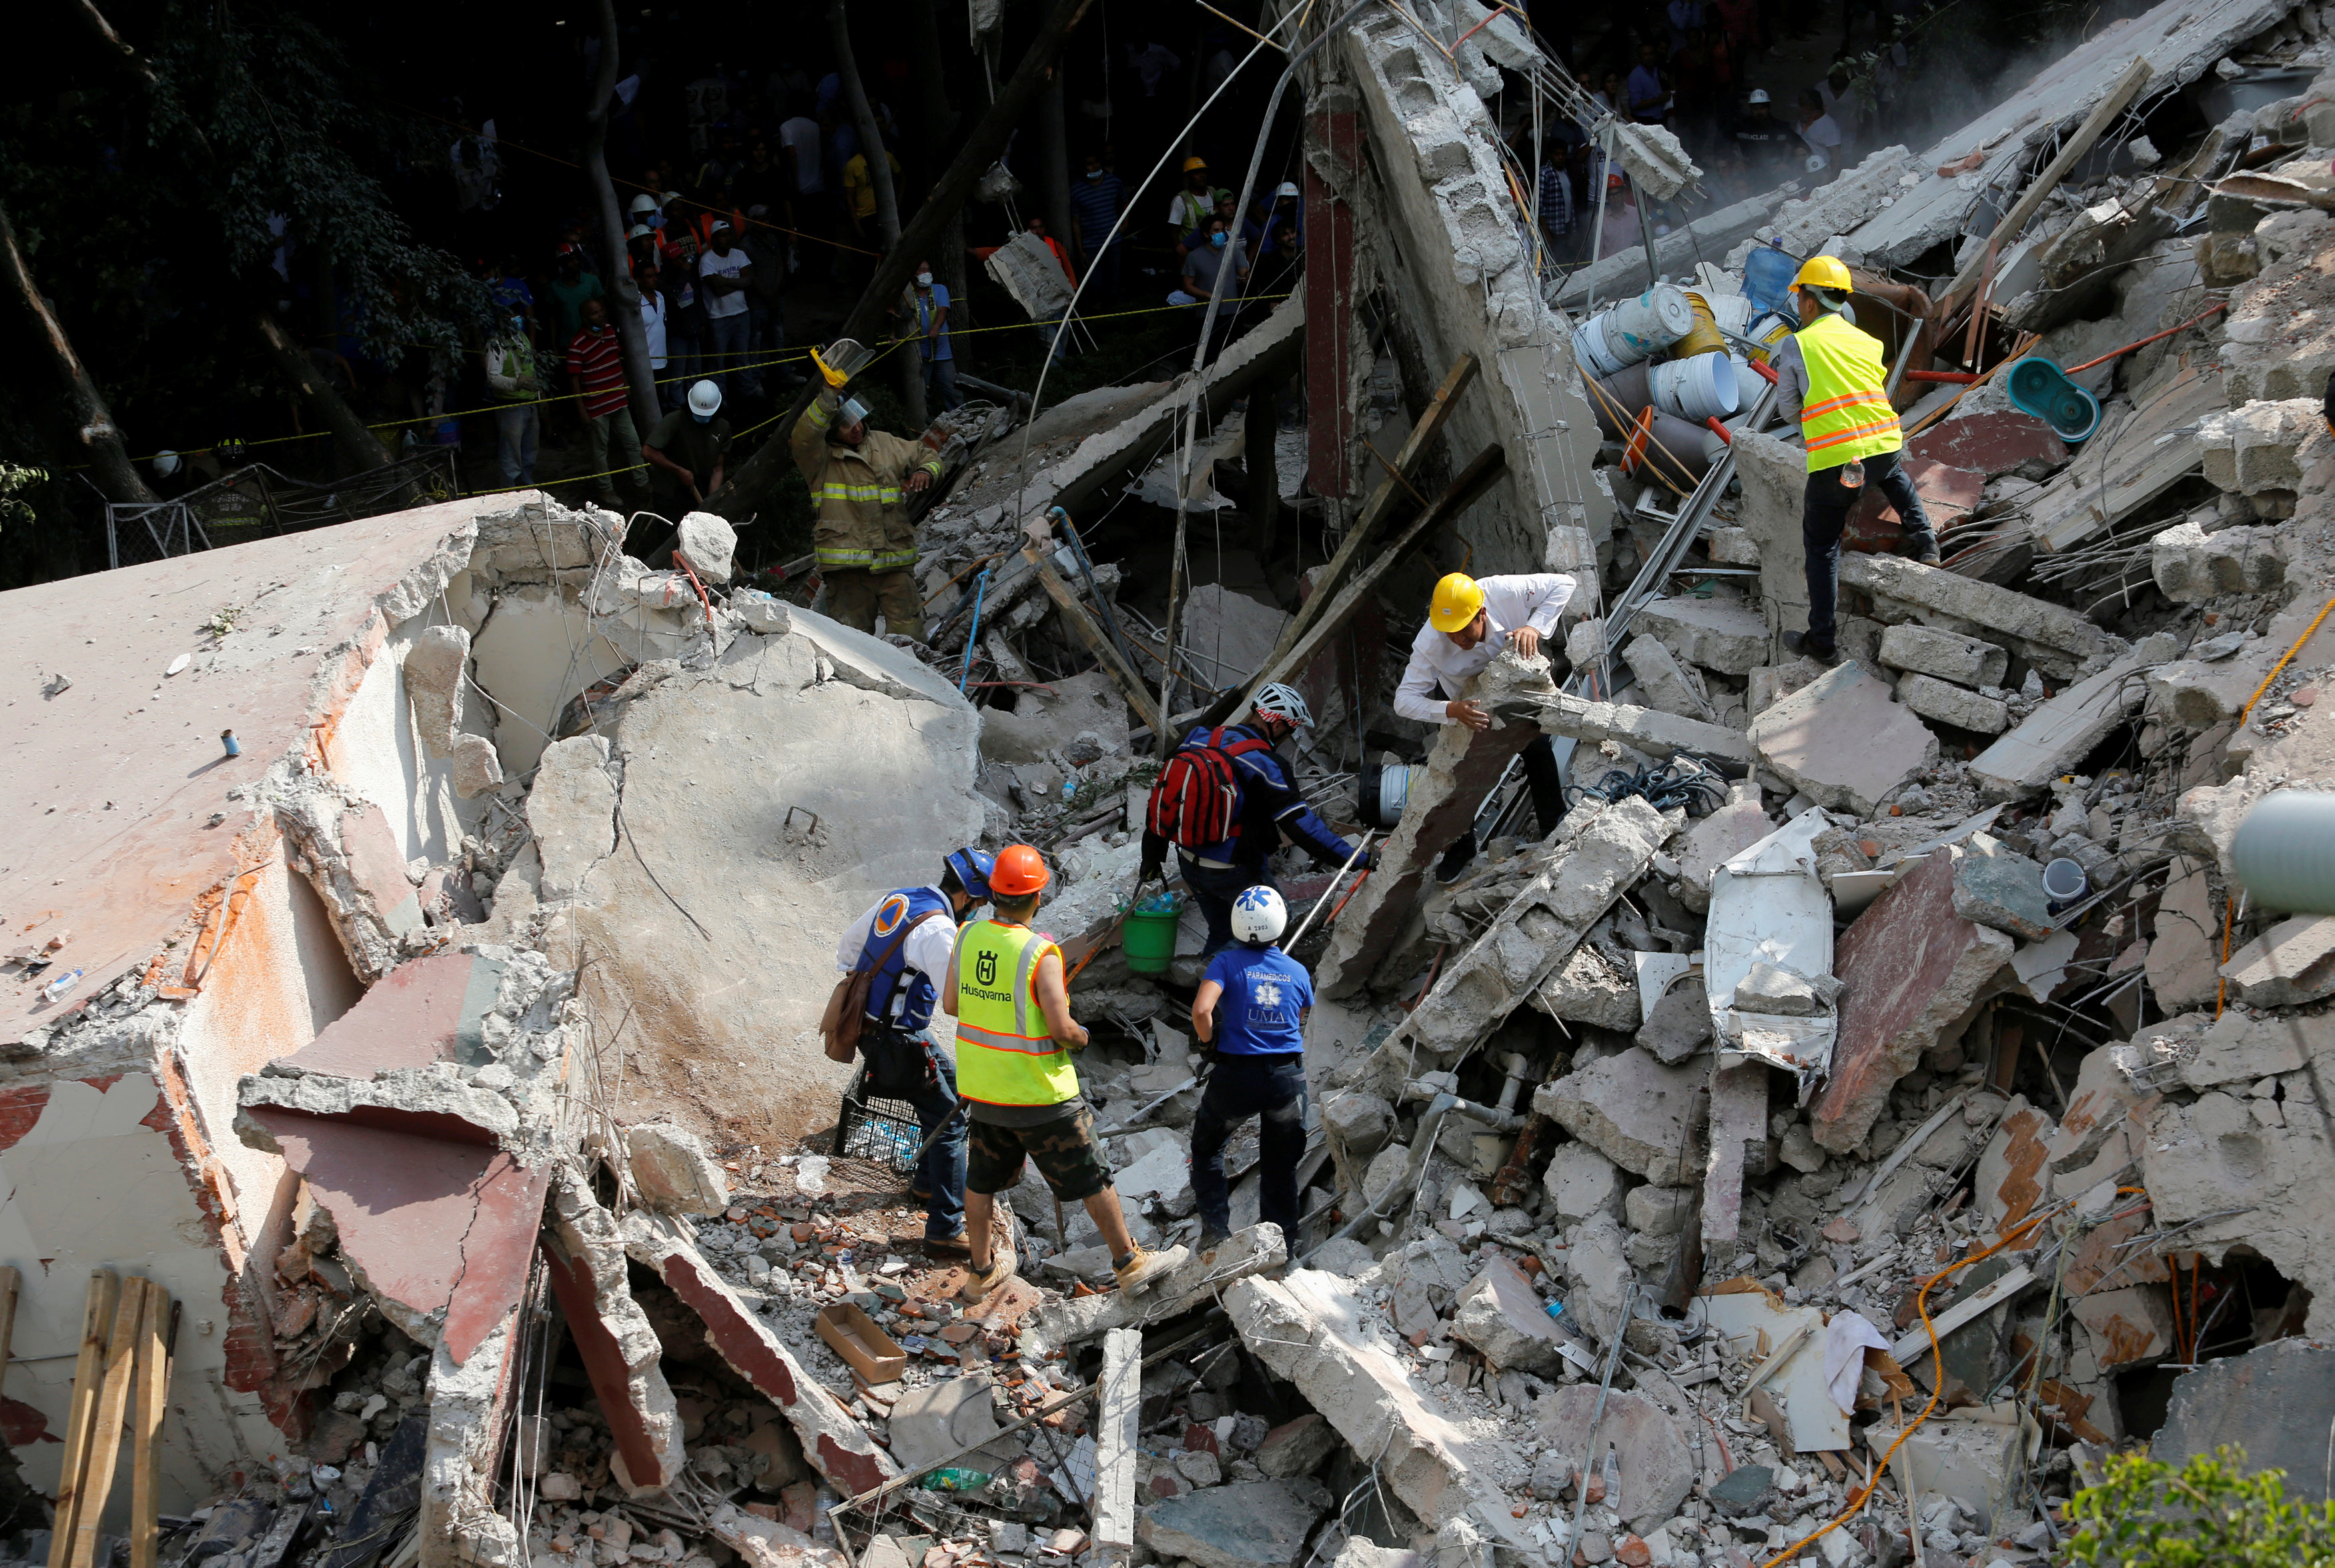 Rescue personnel remove rubble at a collapsed building while searching for people after an earthquake hit Mexico City, Mexico September 19, 2017. REUTERS/Claudia Daut